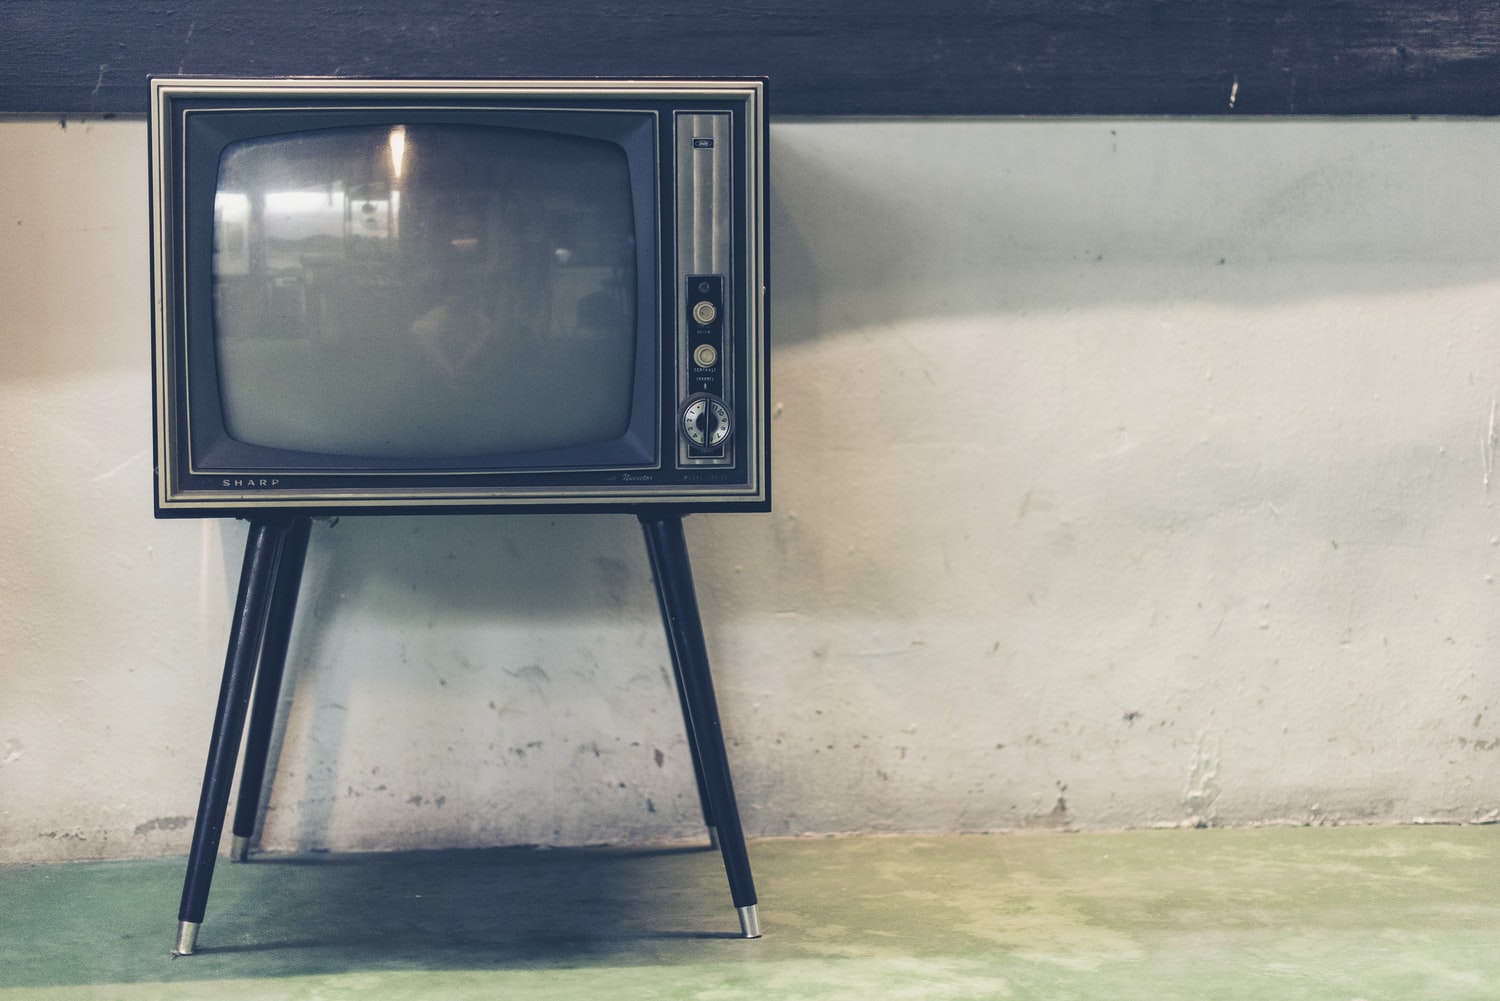 2022: The Last Year of Television?